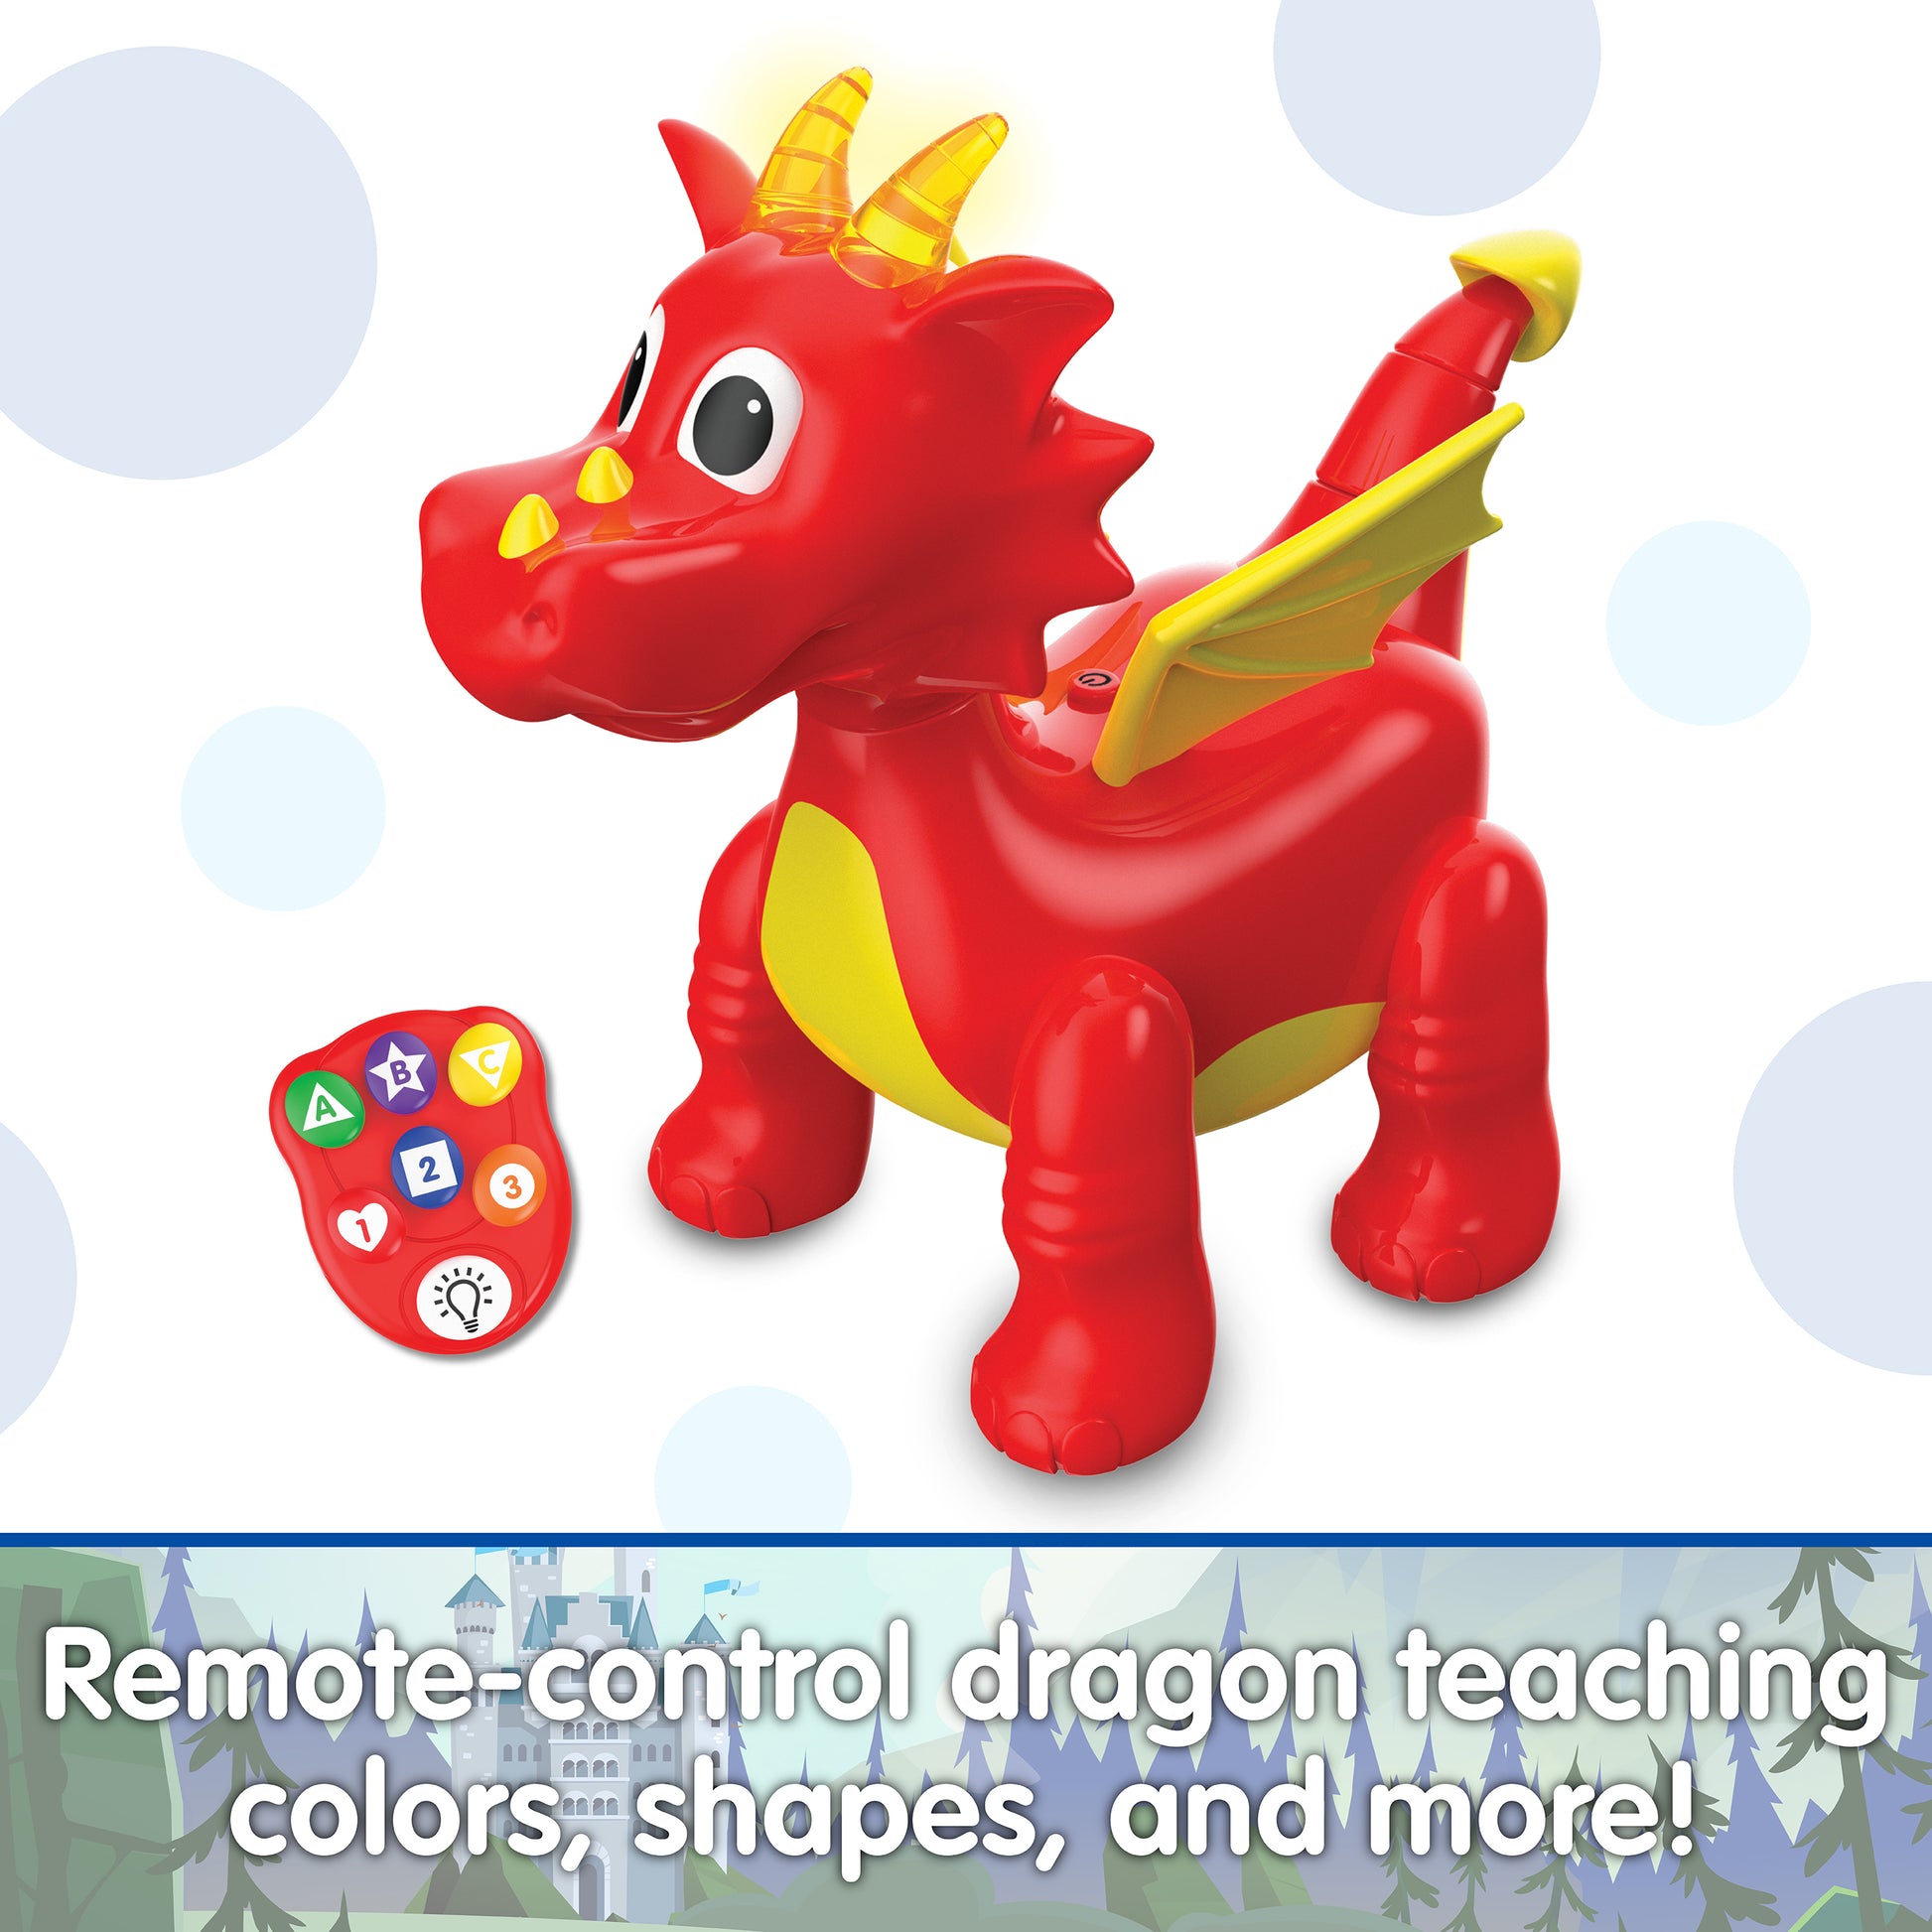 Infographic about Dancing Dragon that says, "Remote-control dragon teaching colors, shapes, and more!"